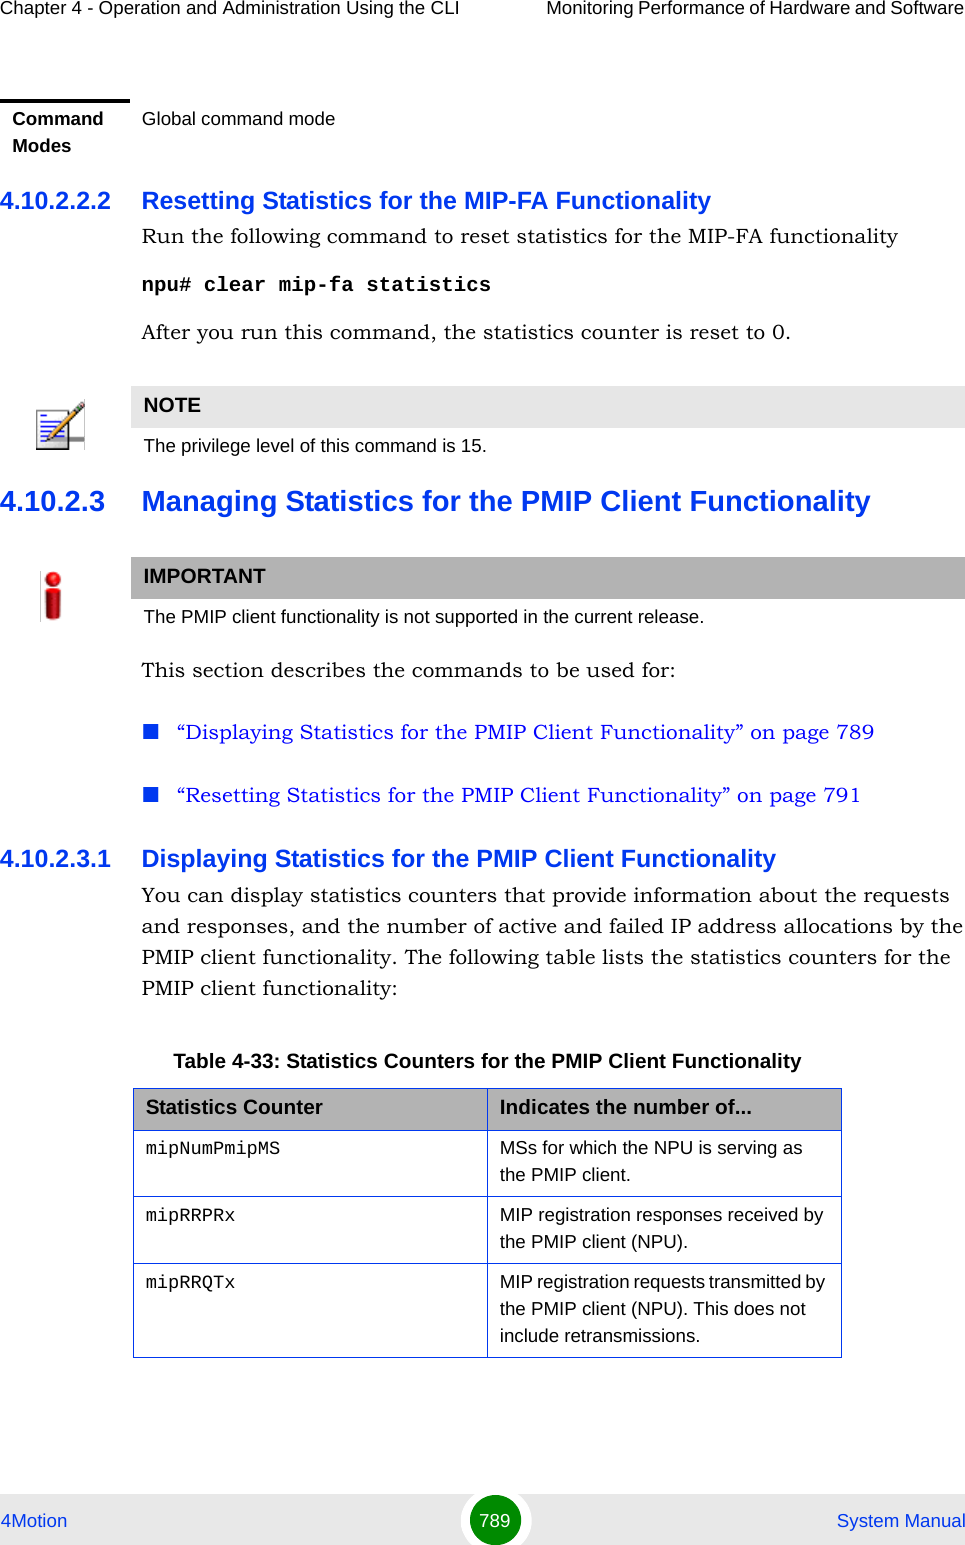 Chapter 4 - Operation and Administration Using the CLI Monitoring Performance of Hardware and Software 4Motion 789  System Manual4.10.2.2.2 Resetting Statistics for the MIP-FA FunctionalityRun the following command to reset statistics for the MIP-FA functionalitynpu# clear mip-fa statisticsAfter you run this command, the statistics counter is reset to 0.4.10.2.3 Managing Statistics for the PMIP Client FunctionalityThis section describes the commands to be used for:“Displaying Statistics for the PMIP Client Functionality” on page 789“Resetting Statistics for the PMIP Client Functionality” on page 7914.10.2.3.1 Displaying Statistics for the PMIP Client FunctionalityYou can display statistics counters that provide information about the requests and responses, and the number of active and failed IP address allocations by the PMIP client functionality. The following table lists the statistics counters for the PMIP client functionality:Command ModesGlobal command modeNOTEThe privilege level of this command is 15.IMPORTANTThe PMIP client functionality is not supported in the current release.Table 4-33: Statistics Counters for the PMIP Client FunctionalityStatistics Counter Indicates the number of...mipNumPmipMS MSs for which the NPU is serving as the PMIP client.mipRRPRx MIP registration responses received by the PMIP client (NPU).mipRRQTx MIP registration requests transmitted by the PMIP client (NPU). This does not include retransmissions.